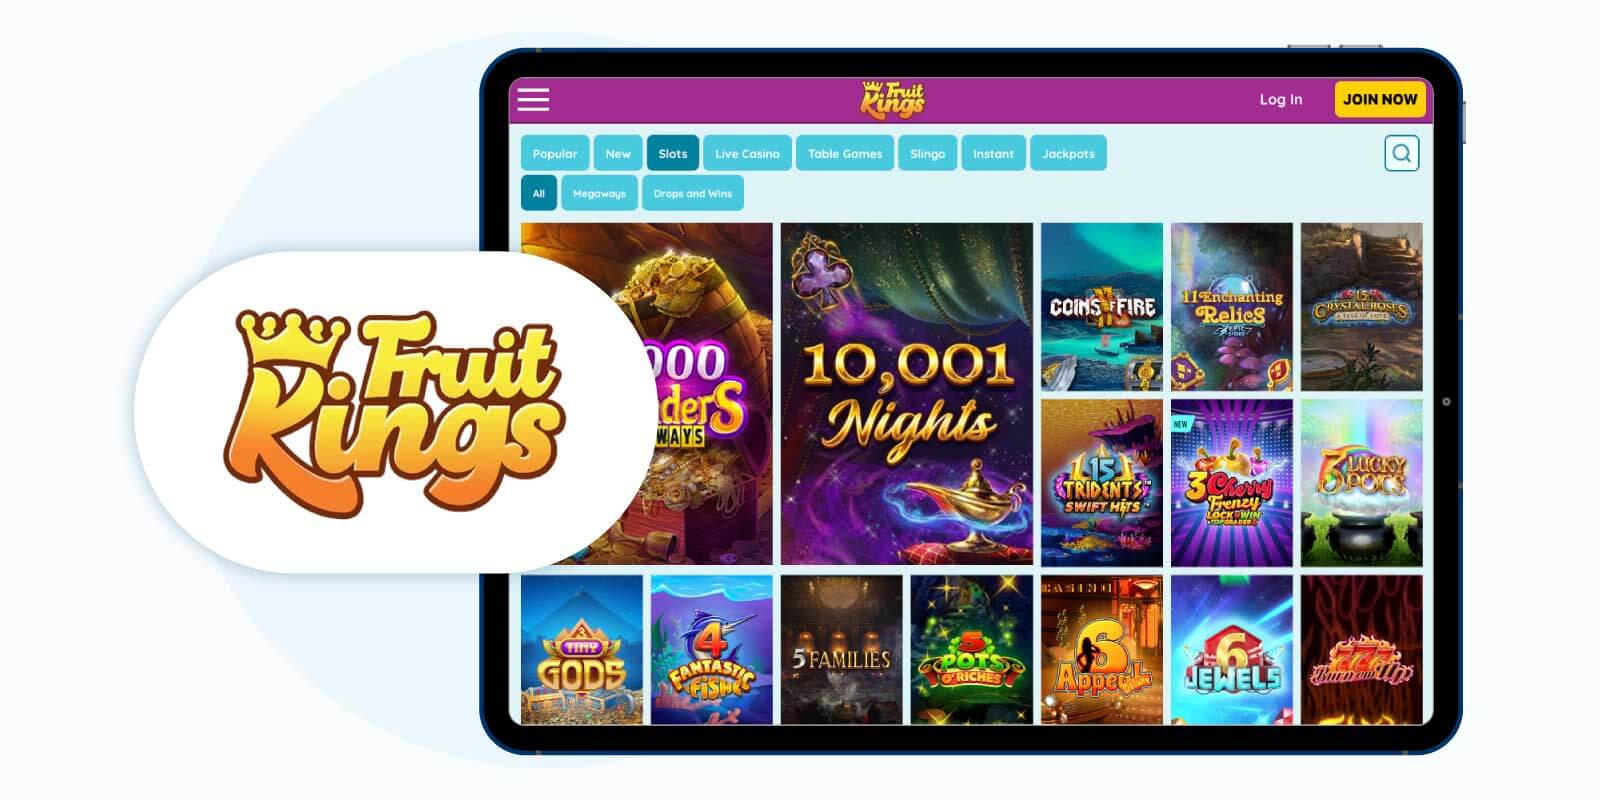 FruitKings - Best Payforit Casino For Slots